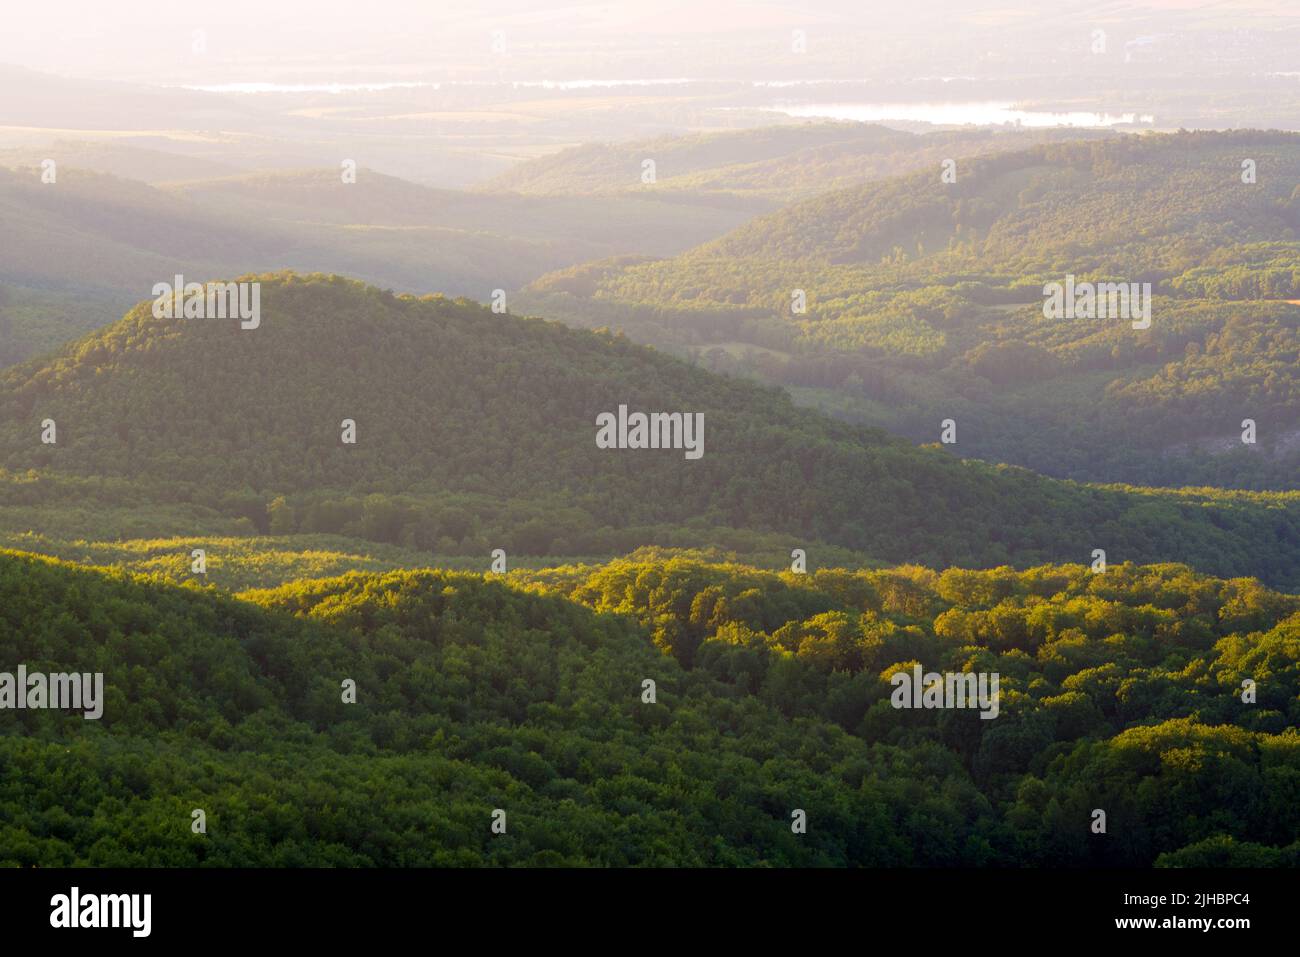 Hills covered with forest in mist Stock Photo